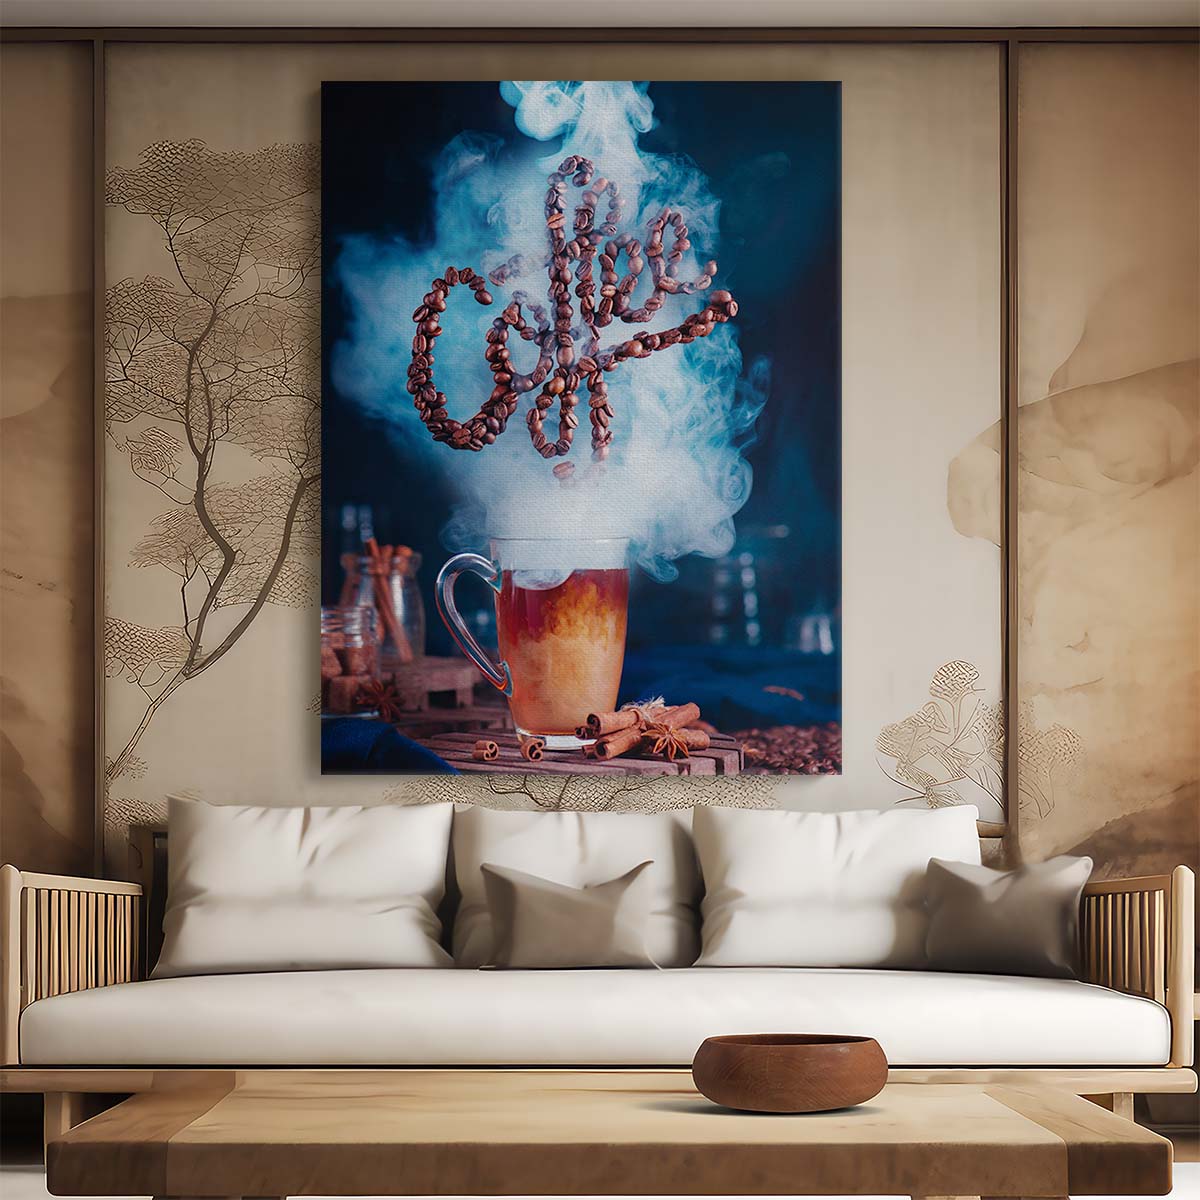 Rustic Coffee Break Still Life Photography Art with Spices by Luxuriance Designs, made in USA